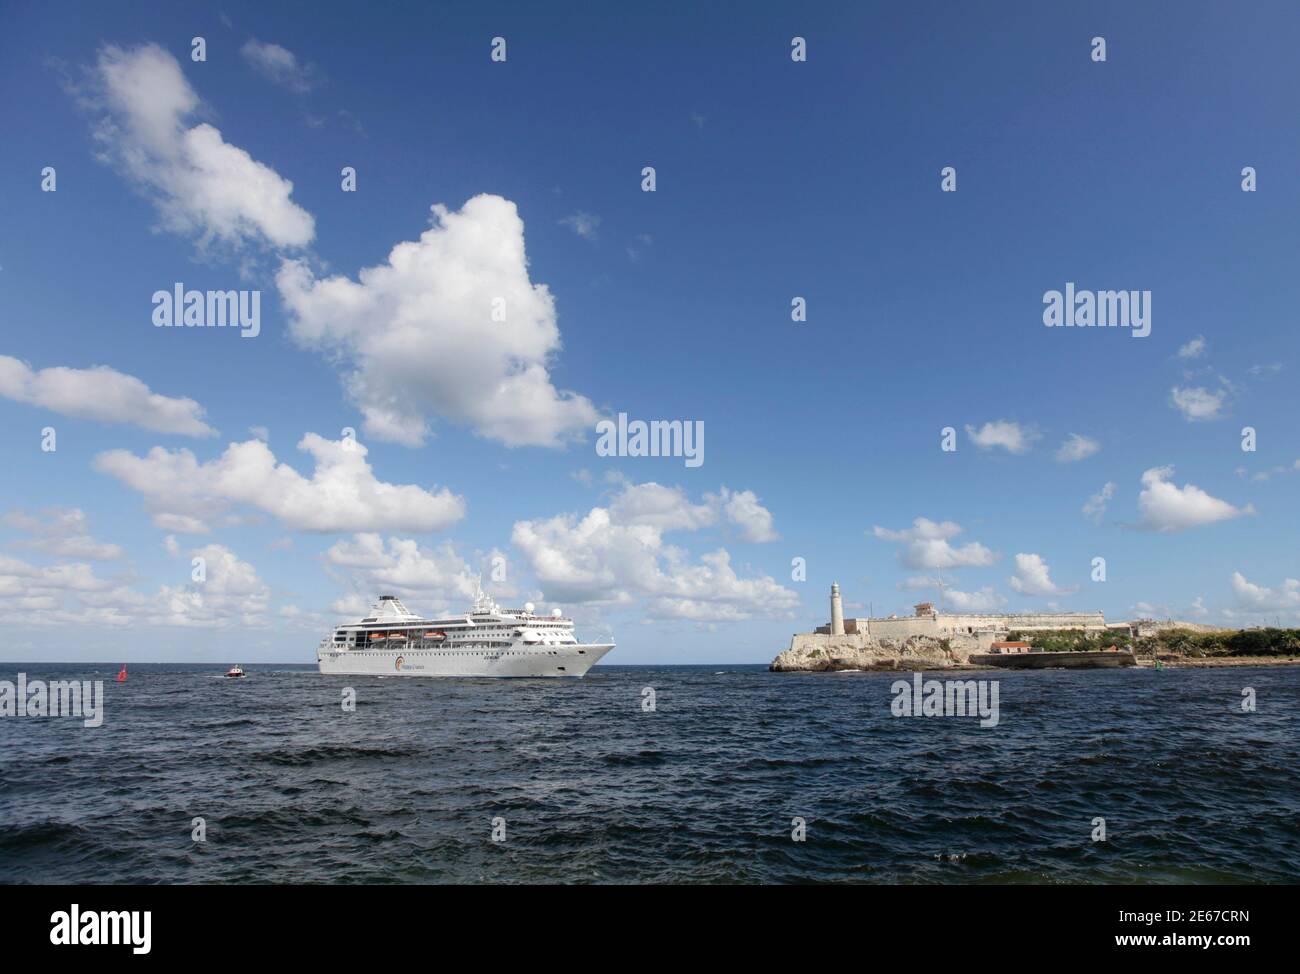 Spanish cruise ship 'Gemini' passes by the lighthouse of the colonial fortress Morro Cabana as it enters Havana Harbor November 12, 2010. Spanish company Happy Cruises will home-port its 'Gemini' ship in Havana and will offer around-Cuba cruises.  REUTERS/Desmond Boylan (CUBA - Tags: SOCIETY TRAVEL BUSINESS) Stock Photo